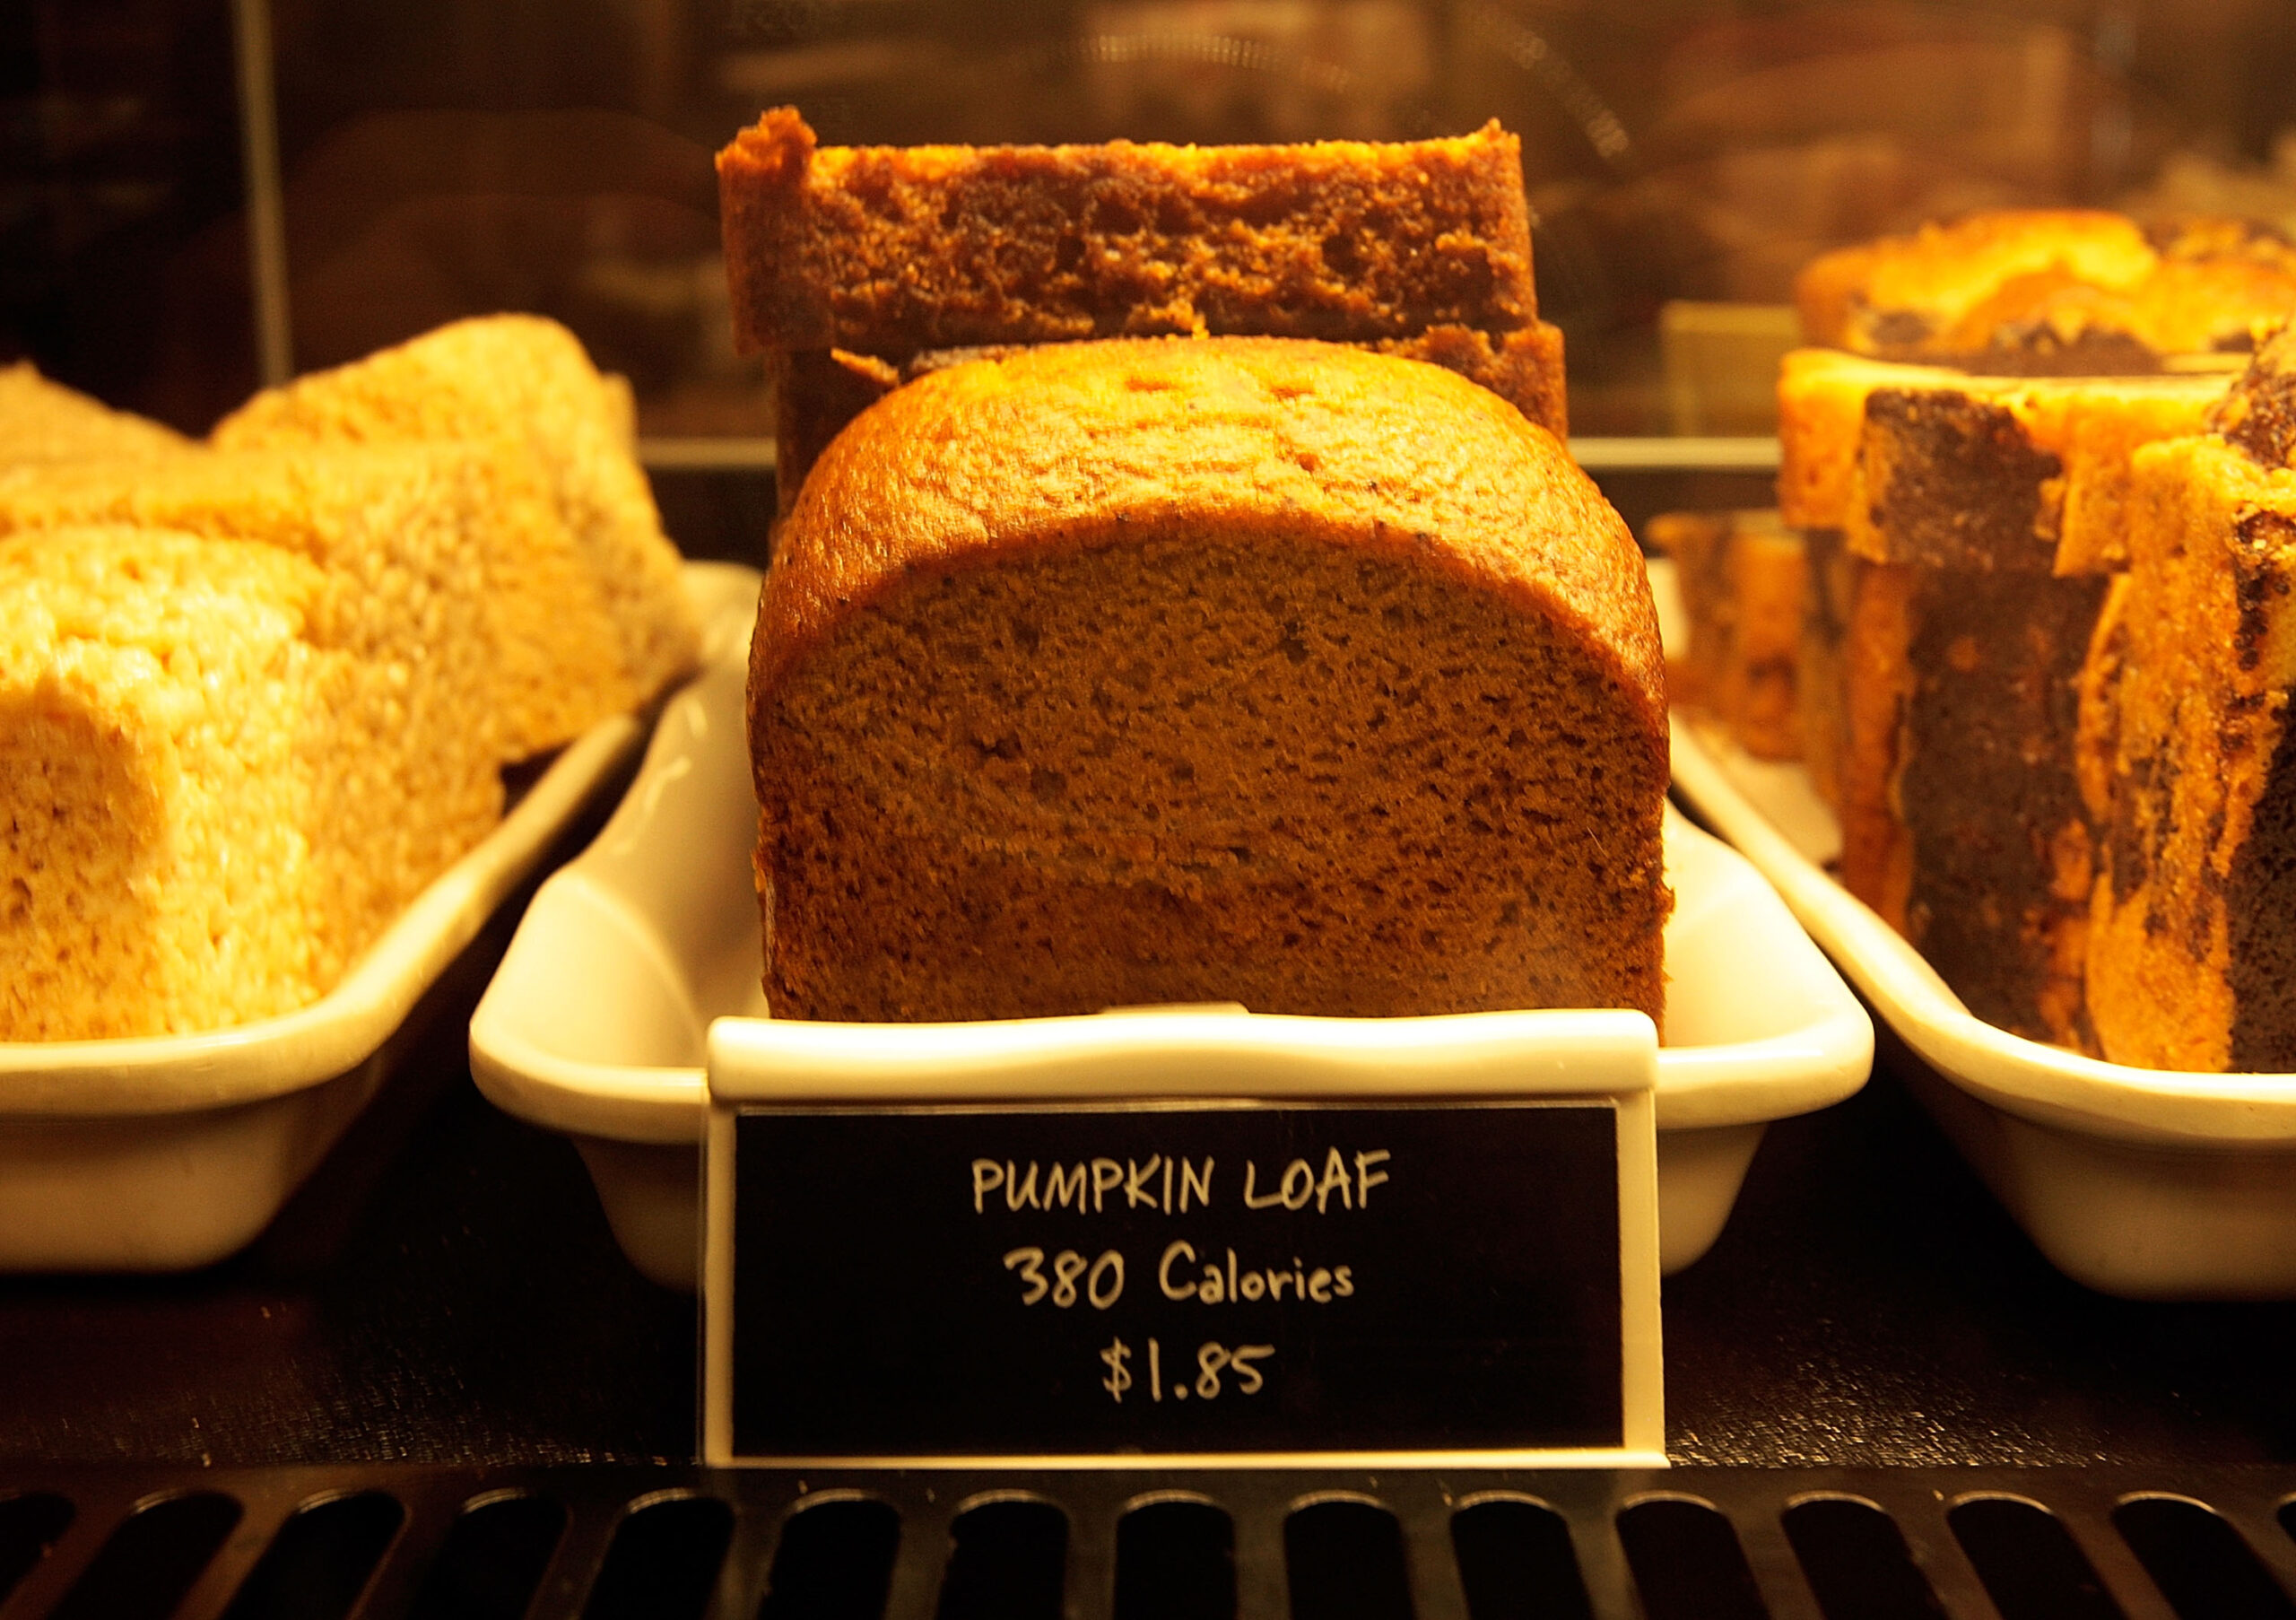 Photograph of Starbucks bread displayed with calorie count listed